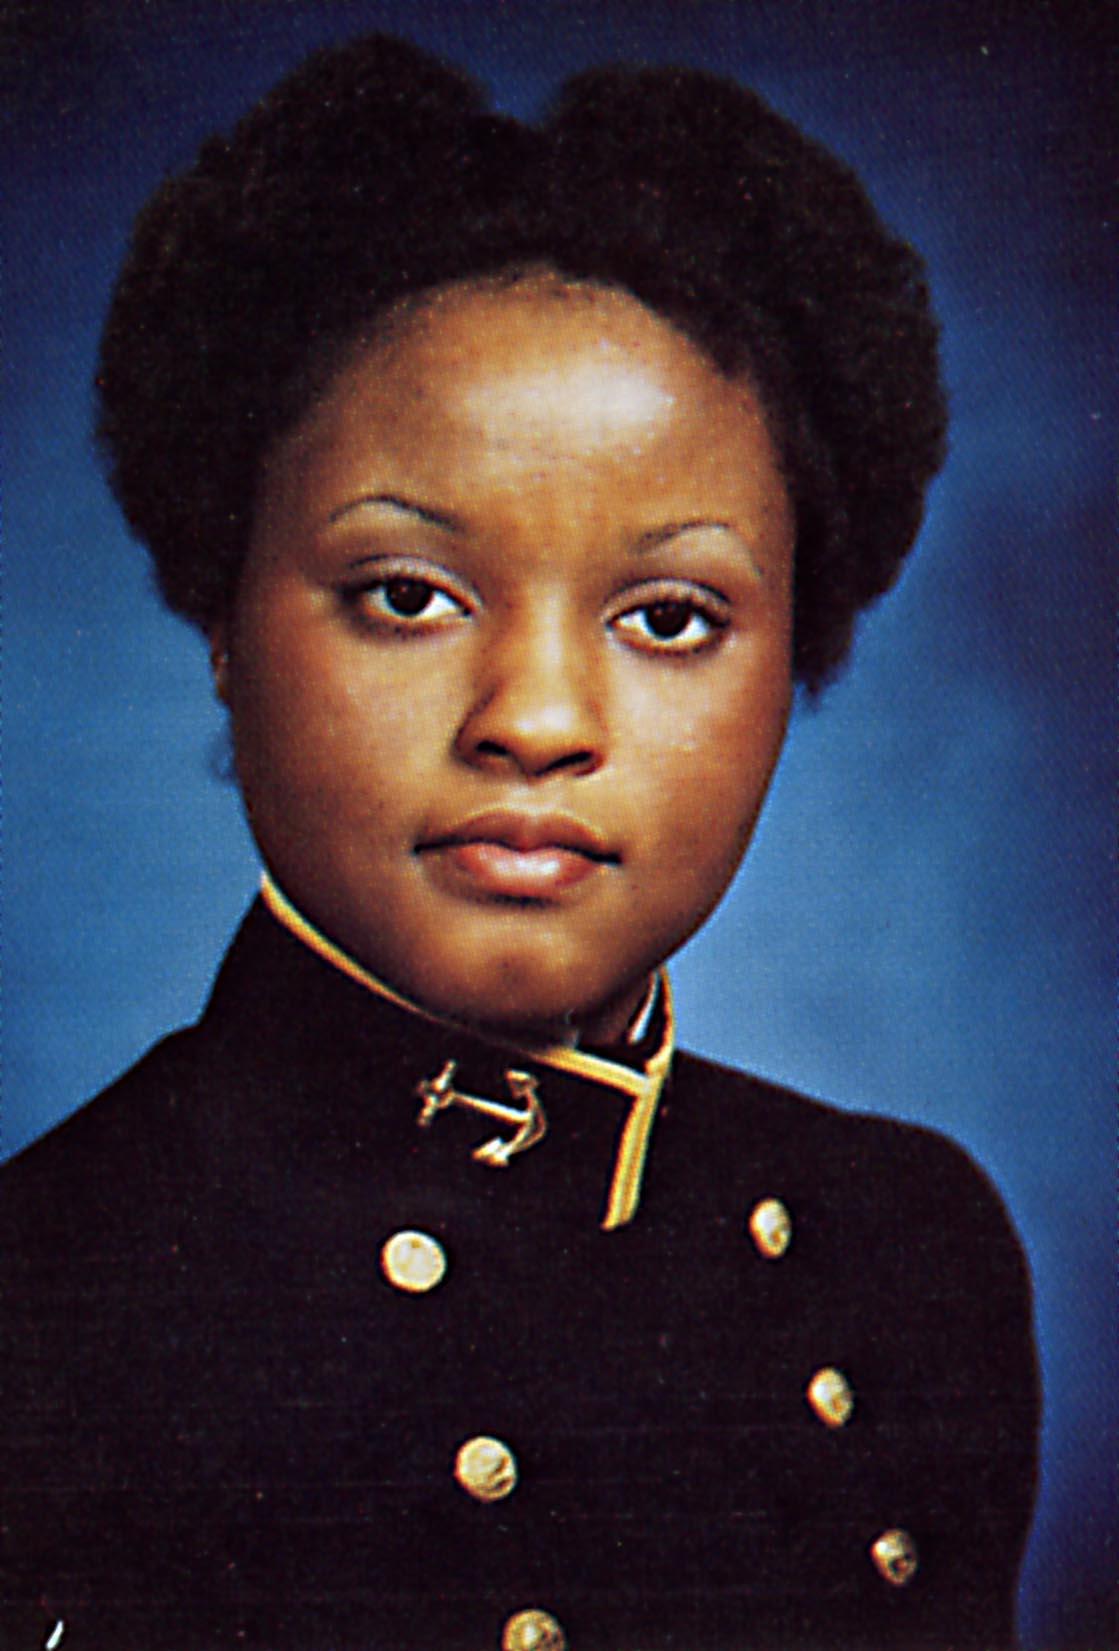 Midshipman Janie L. Mines in 1980, the first Black female to graduate from the U.S. Naval Academy (<a href="https://commons.wikimedia.org/wiki/File:Janie_Mines.jpg">U.S. Naval Academy</a>)